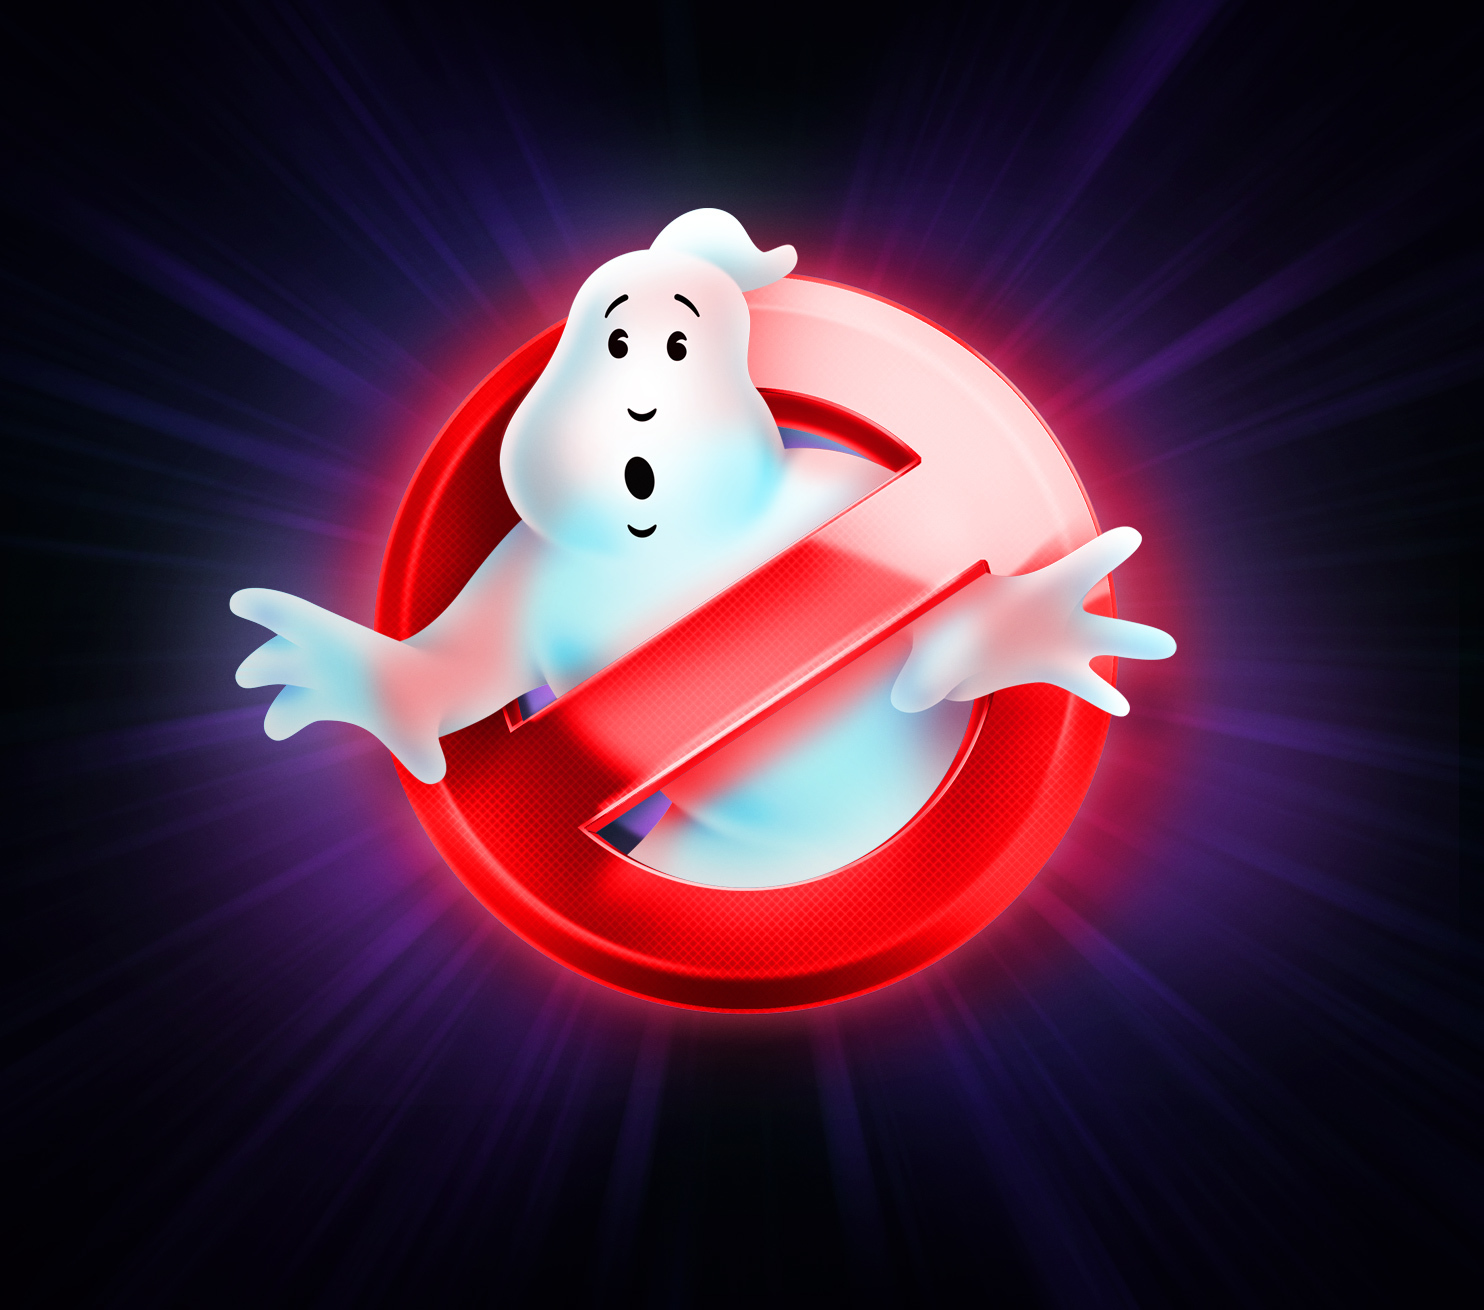 15_ghostbusters_1484px